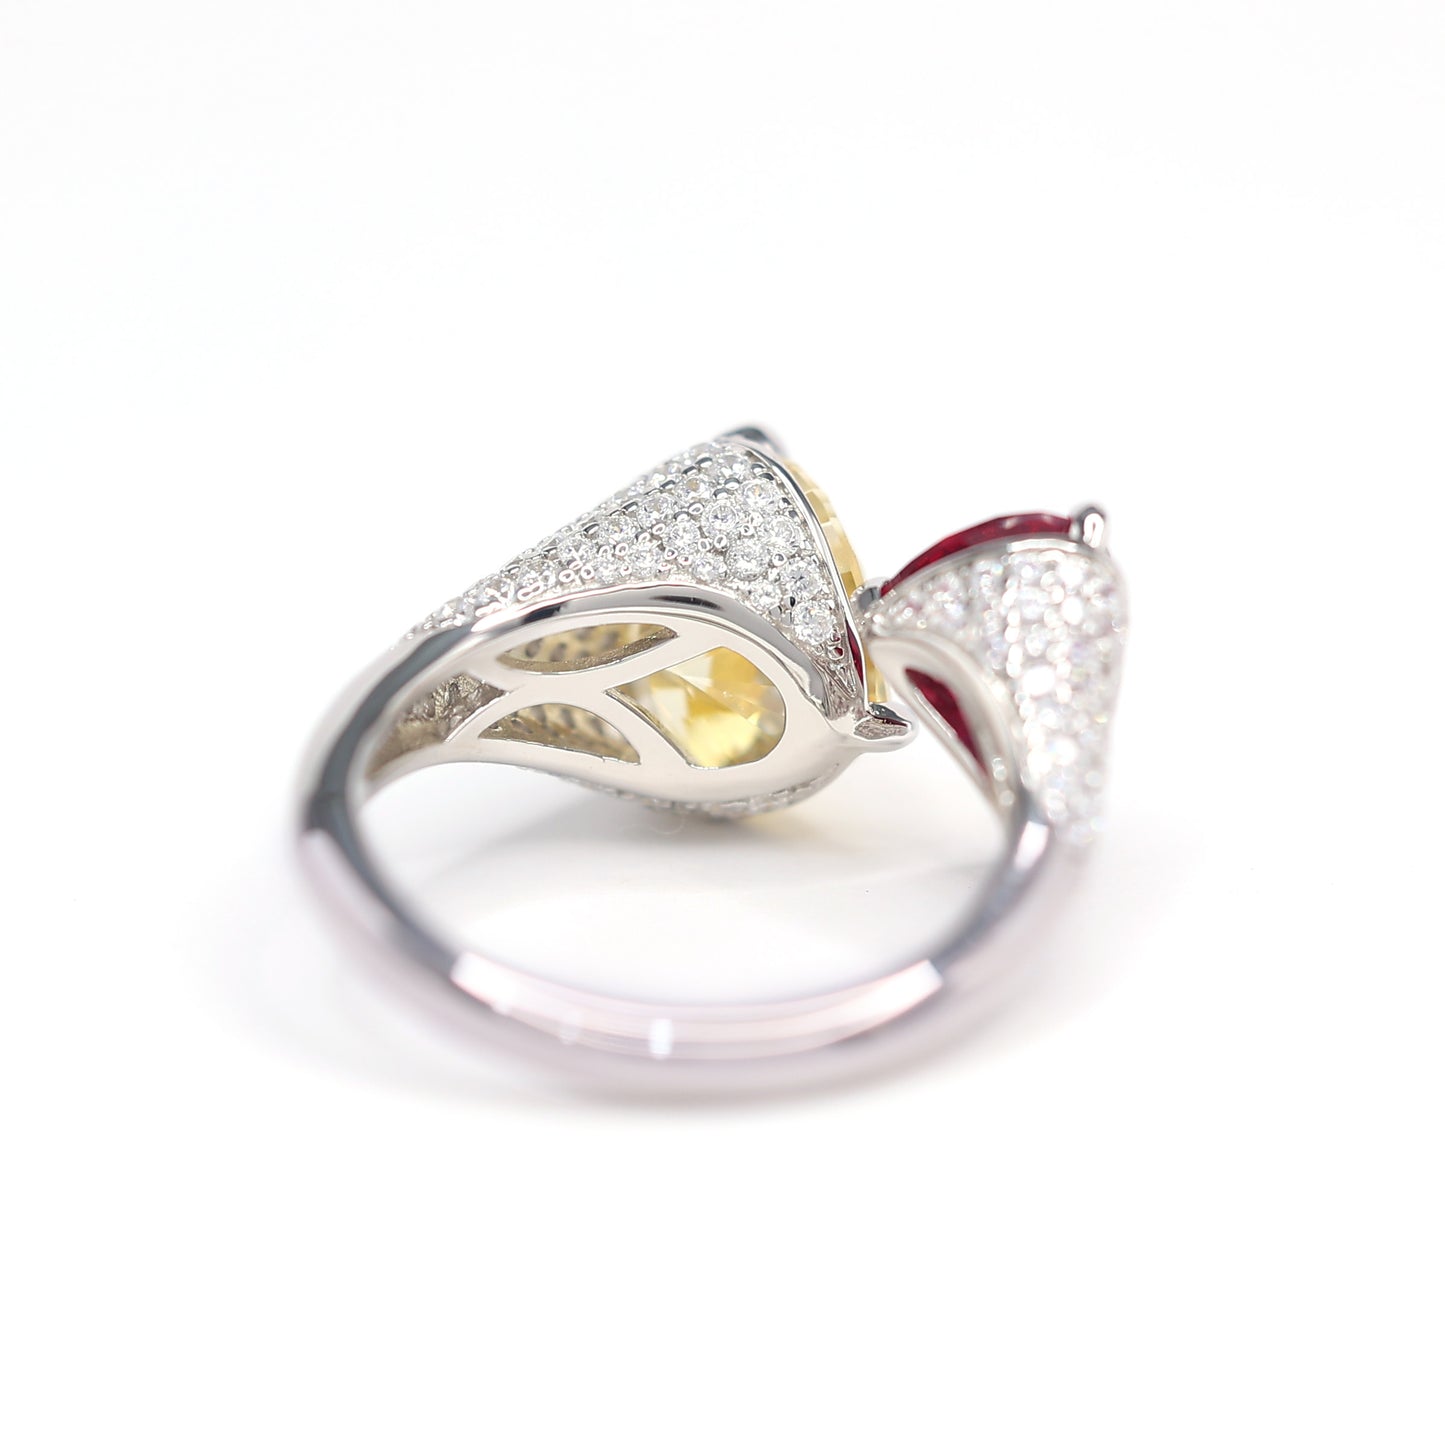 Micro-setting lab created stones Telesthesia ring, sterling silver